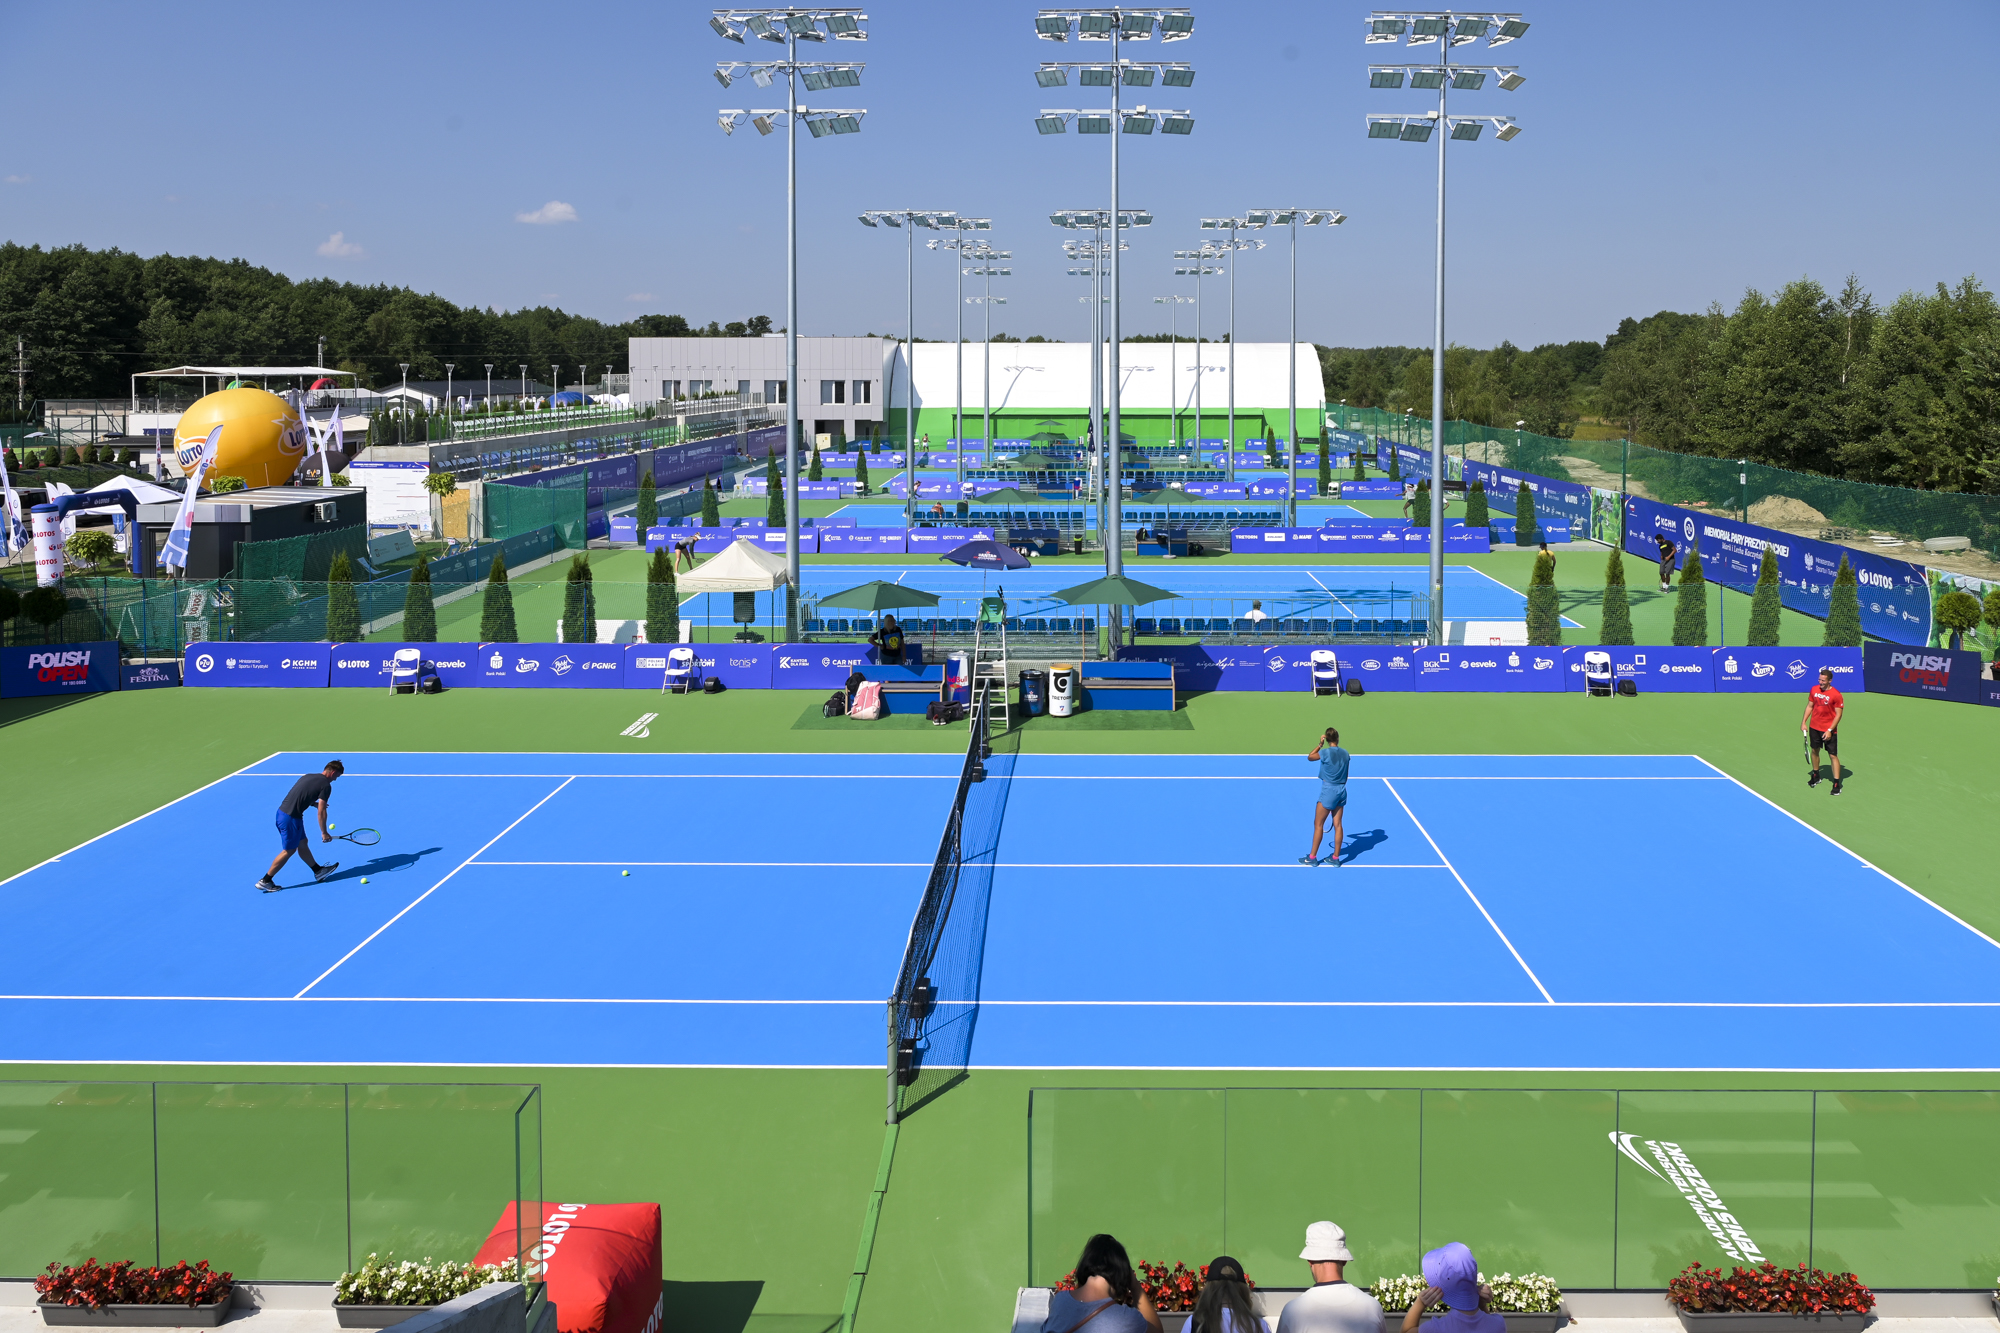 Outdoor hard courts